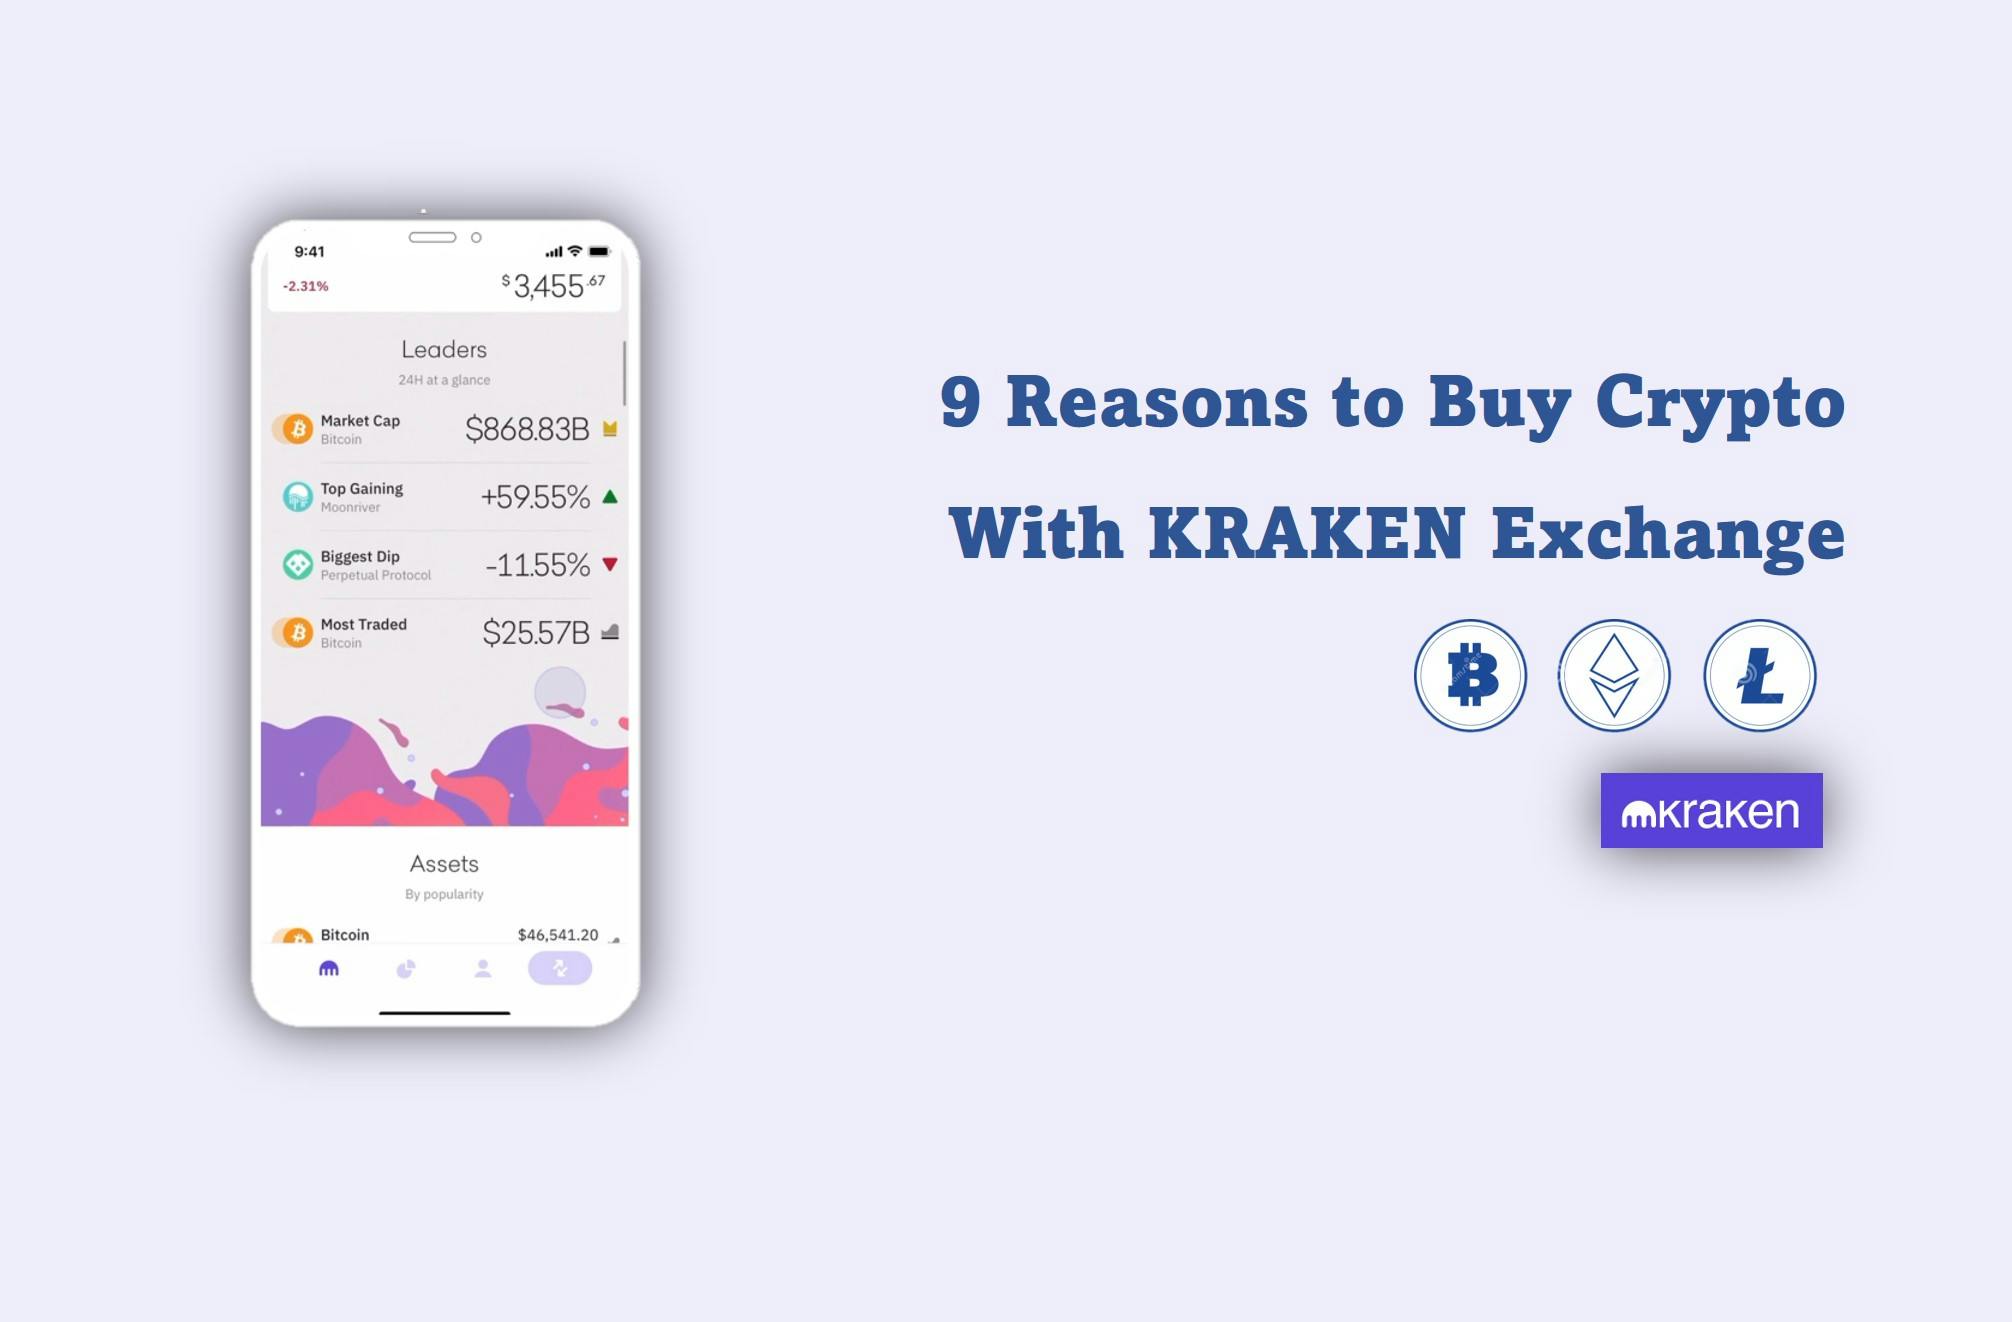 9 Reasons to Buy Crypto With Kraken Exchange